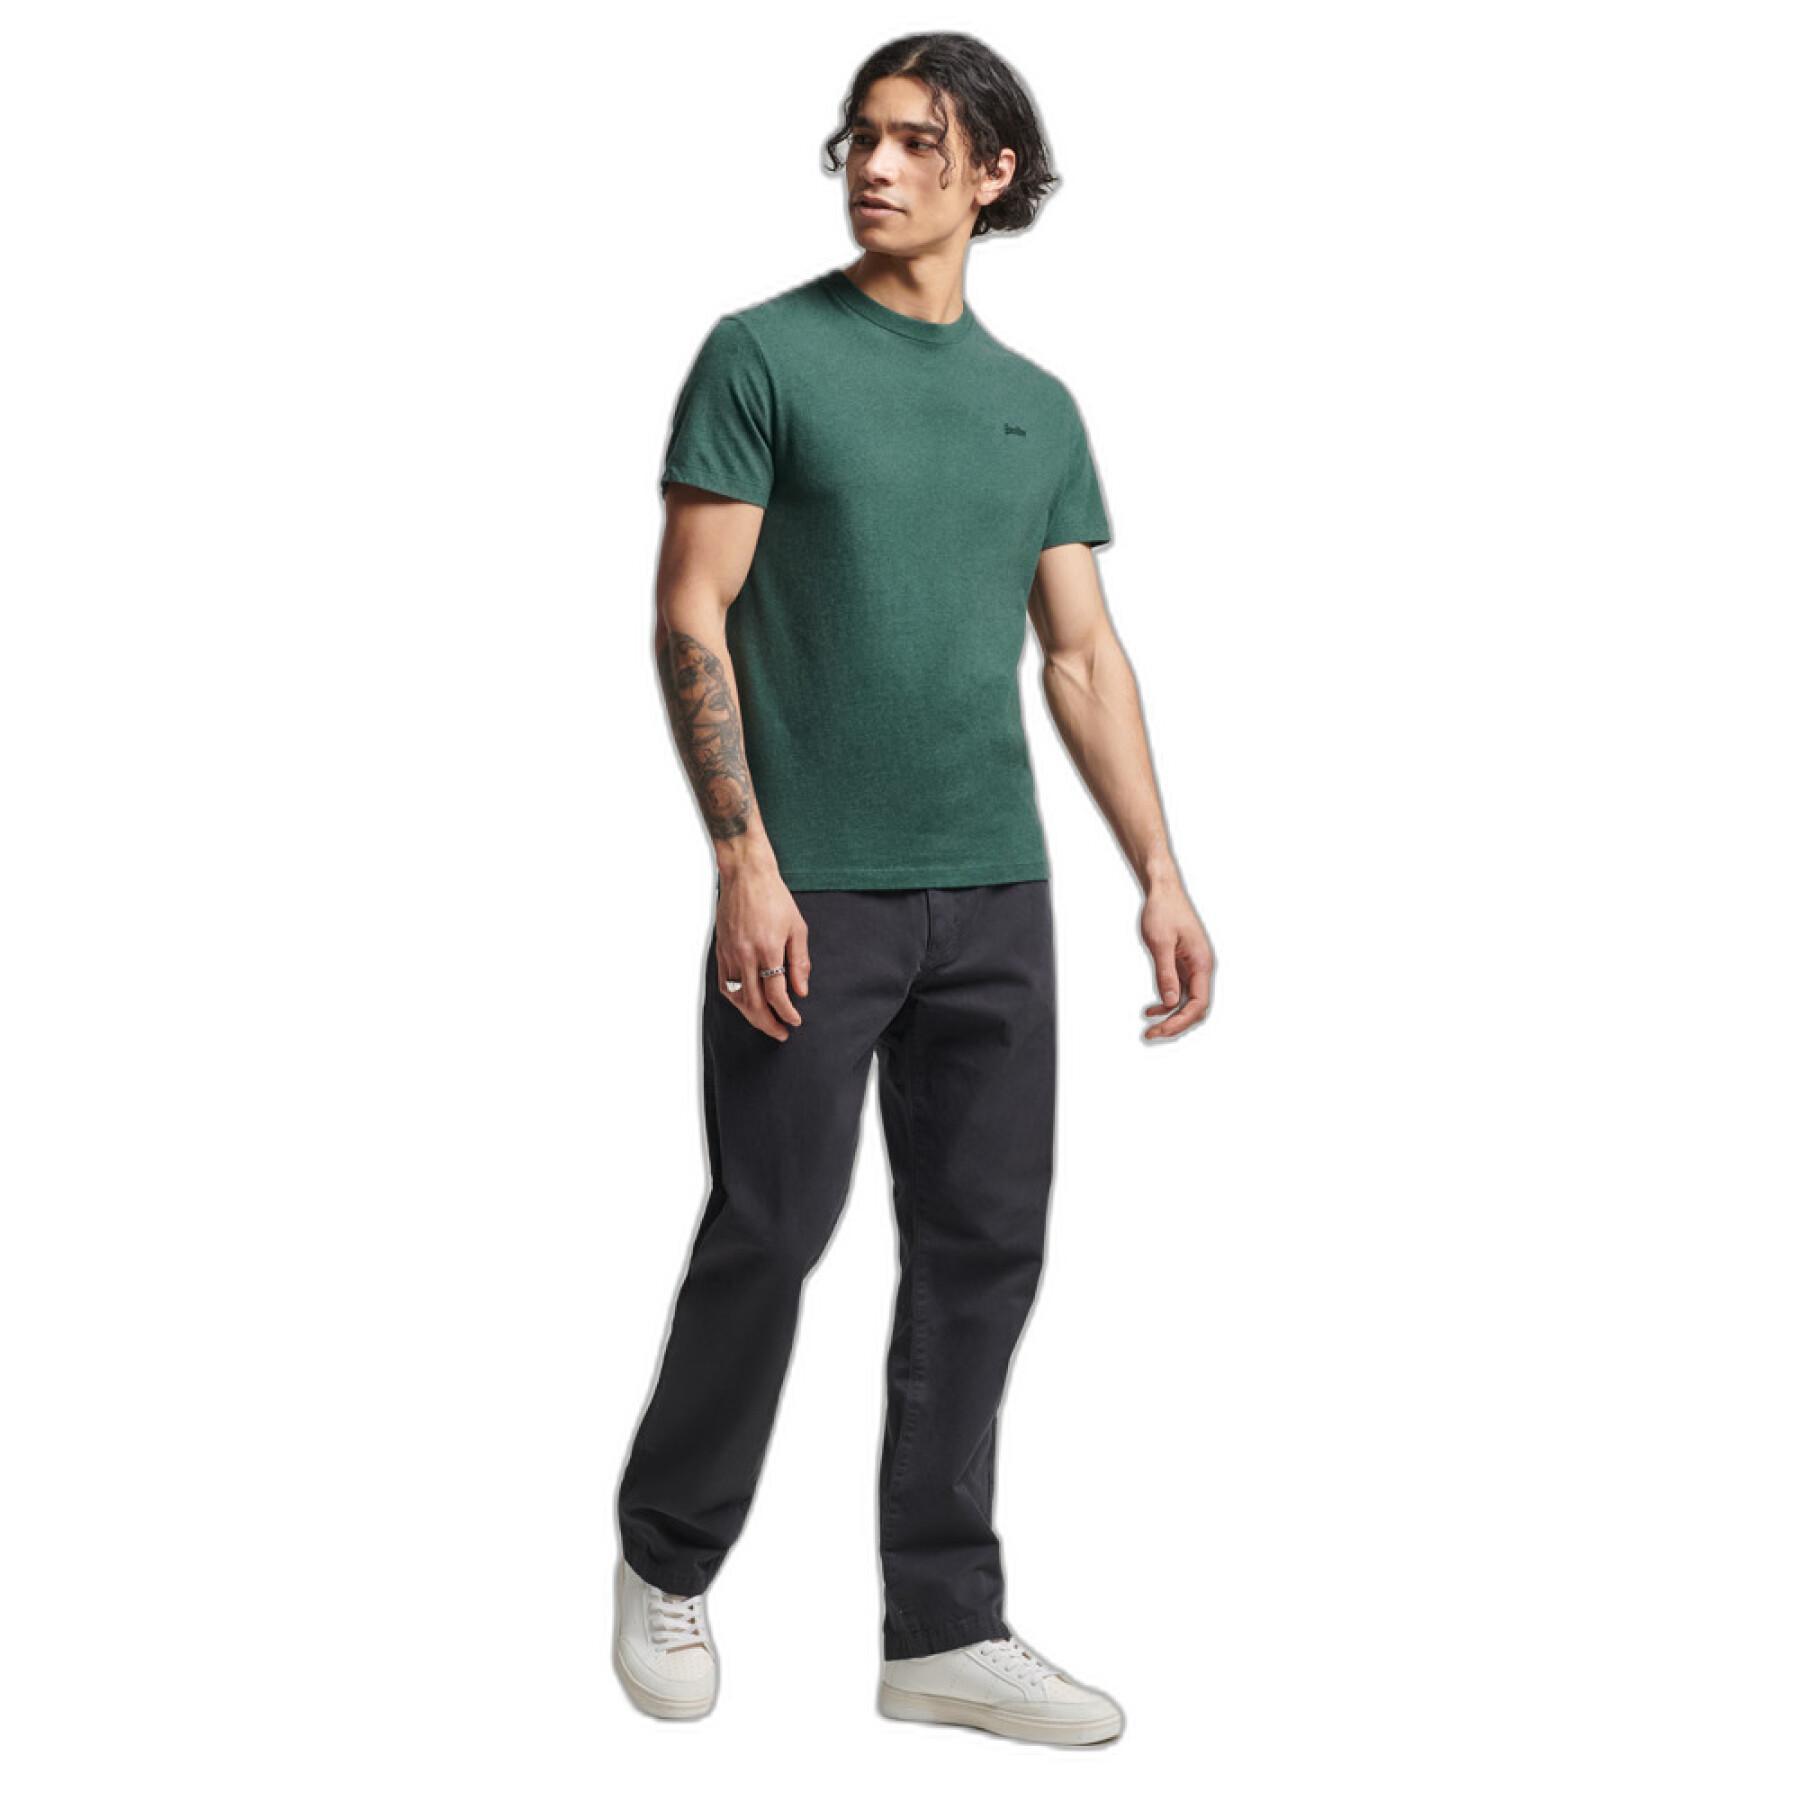 Organic cotton embroidered T-shirt micro Superdry